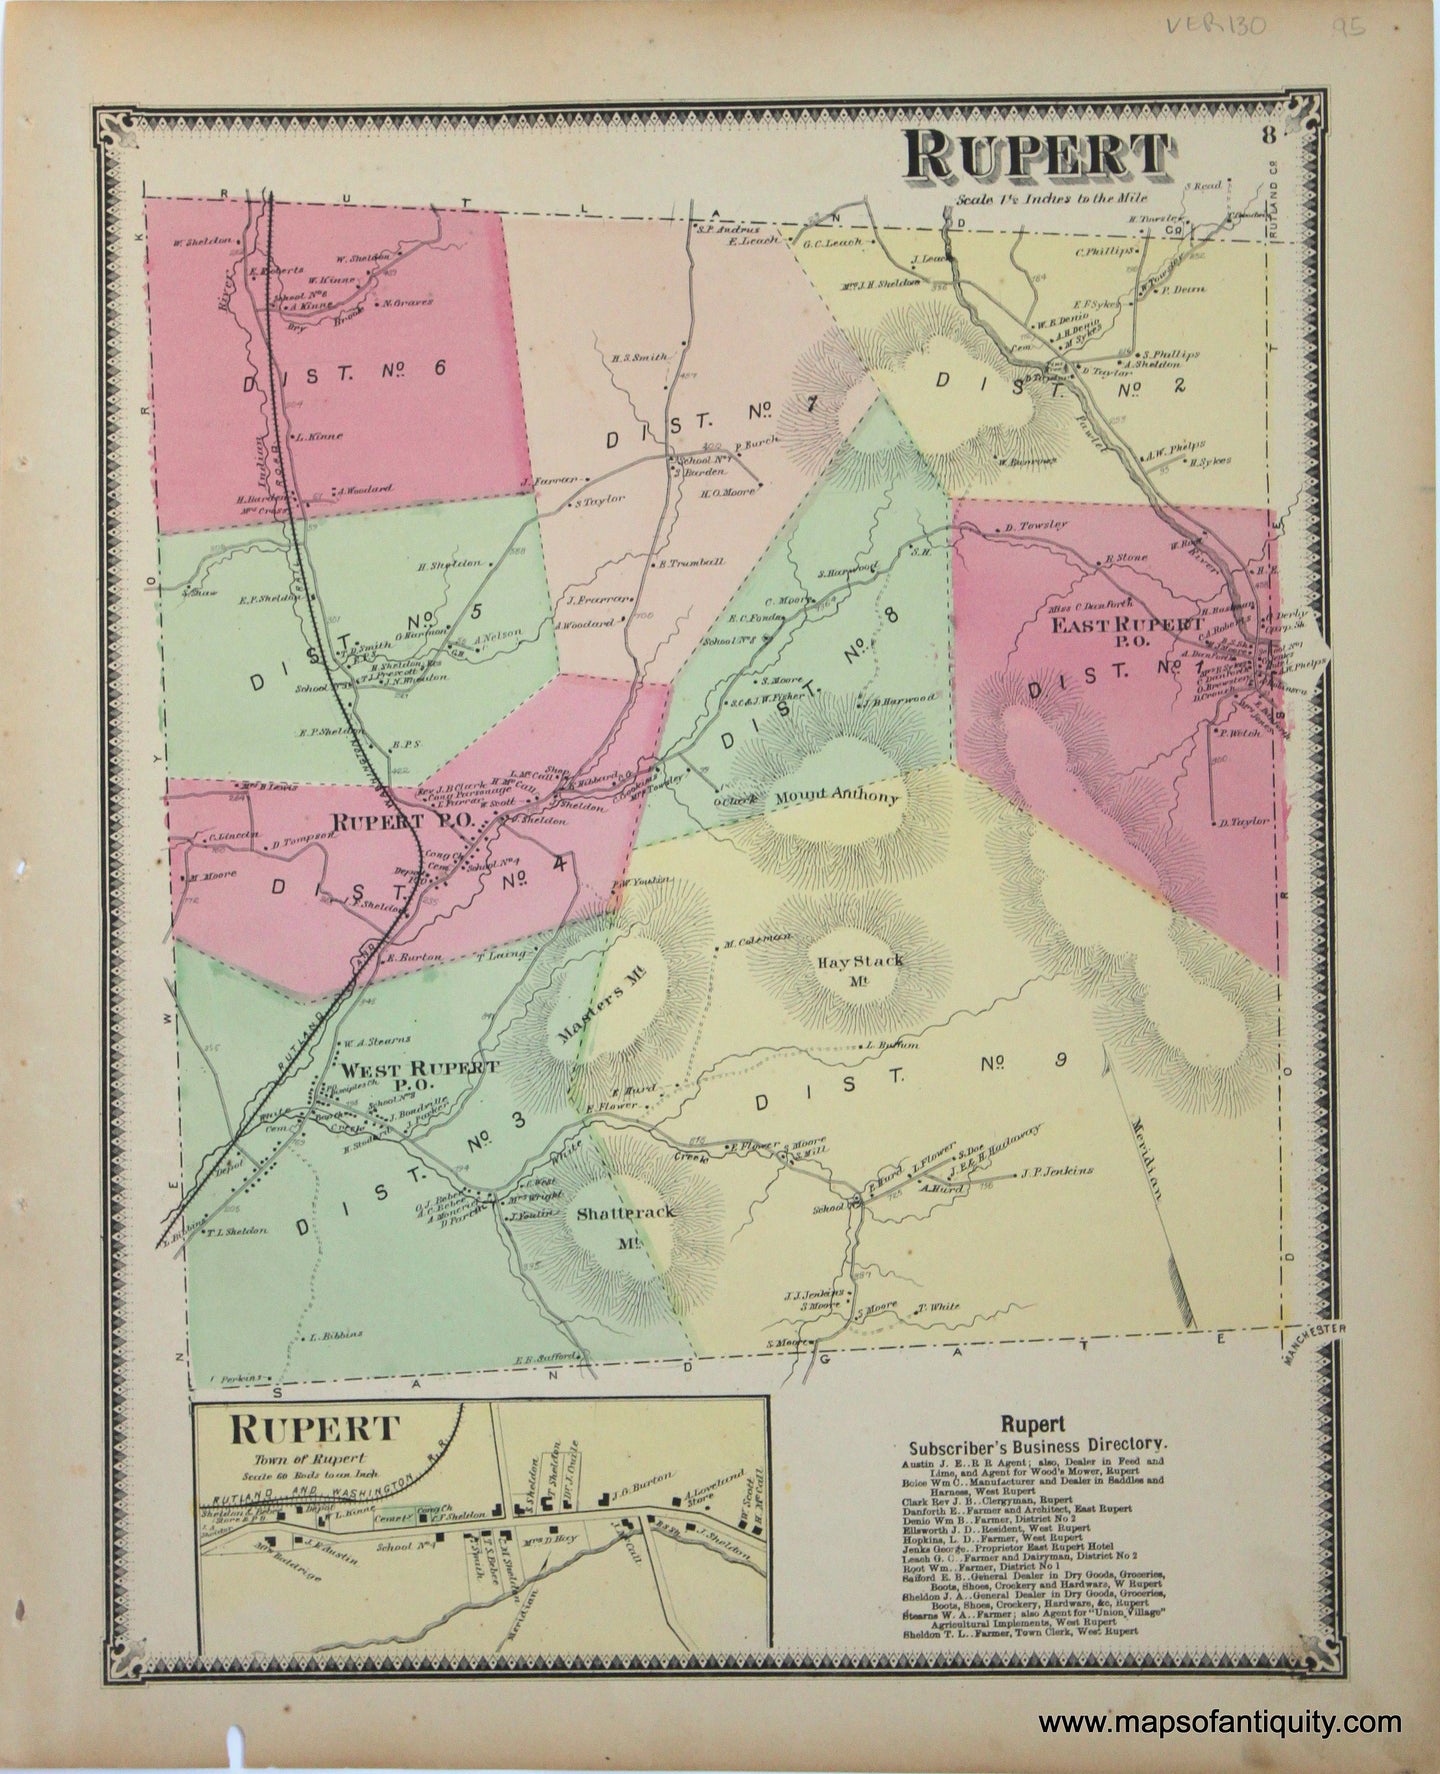 Antique-Hand-Colored-Map-Rupert-VT---Vermont-**********-United-States-Northeast-1869-Beers-Maps-Of-Antiquity